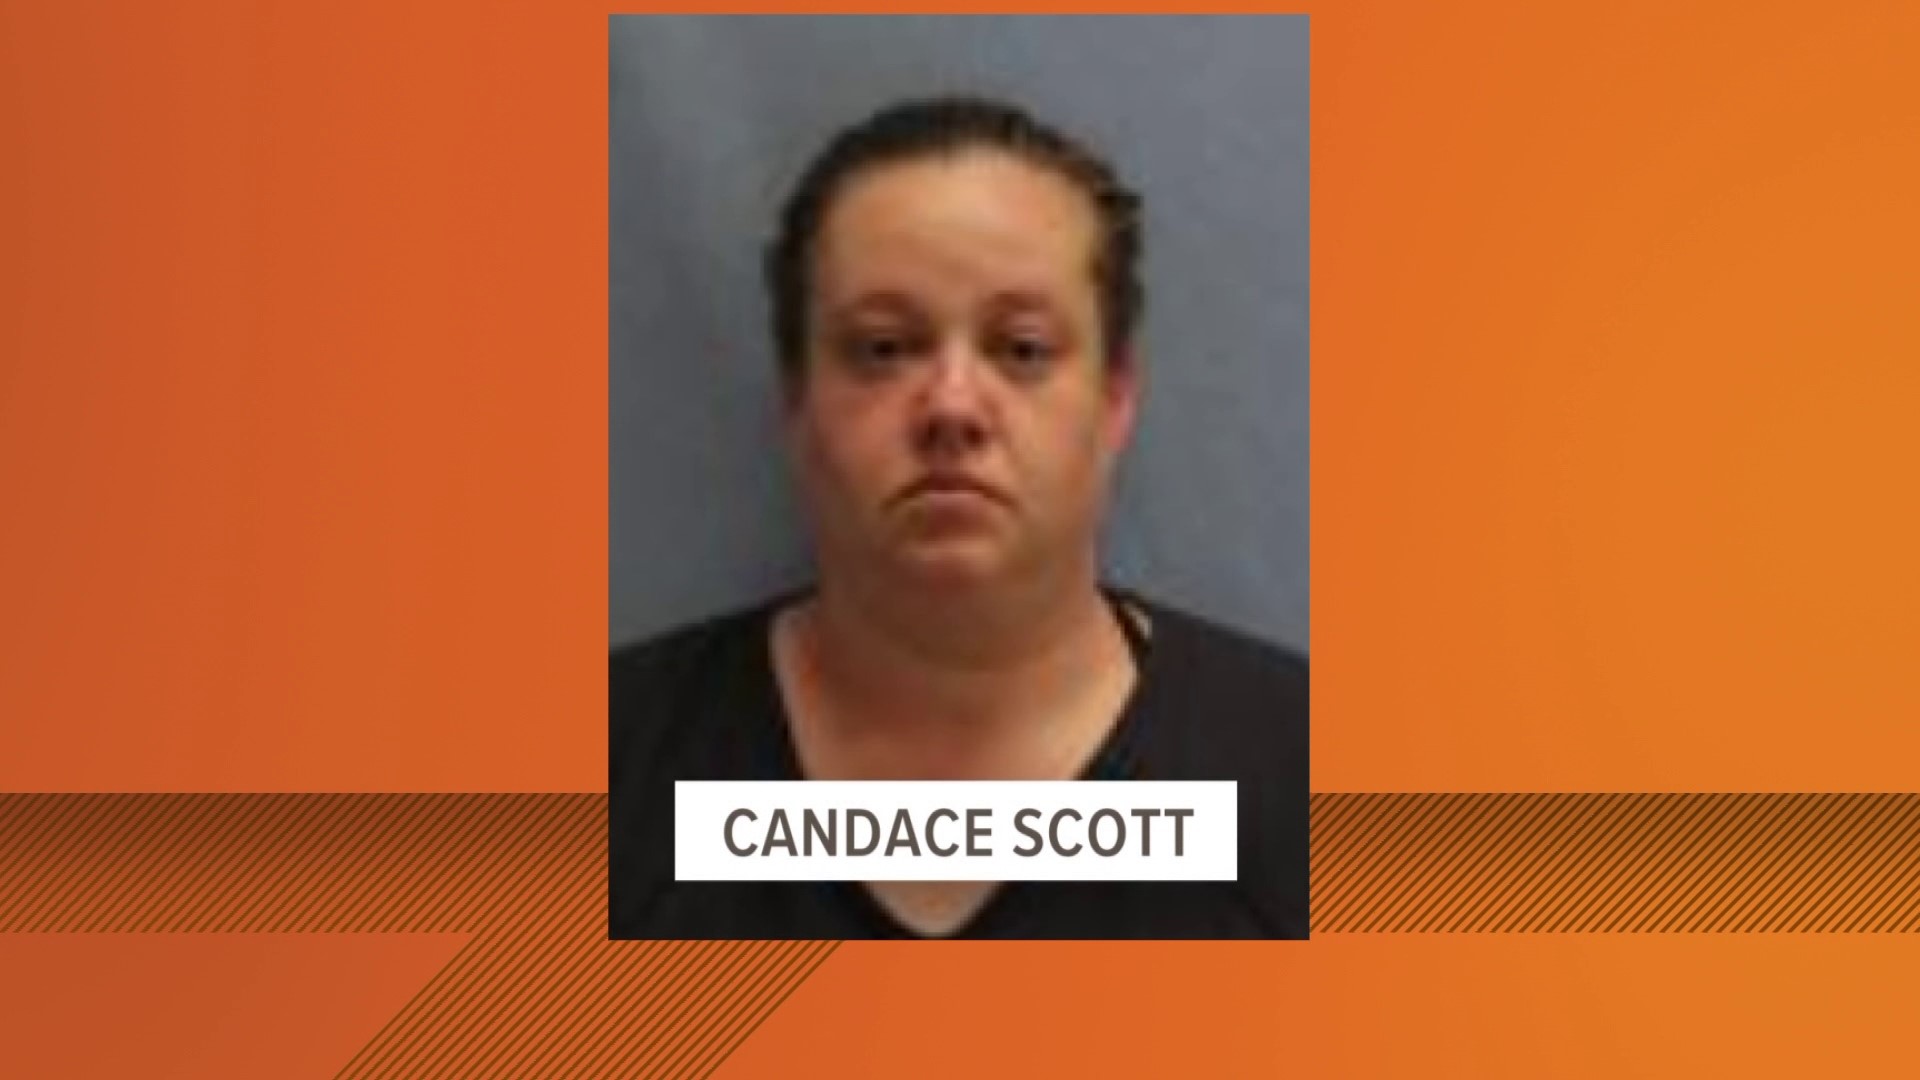 Candace Scott, a former morgue worker, is on trial for allegedly selling 20 boxes of human body parts on Facebook Marketplace to a man in Pennsylvania.